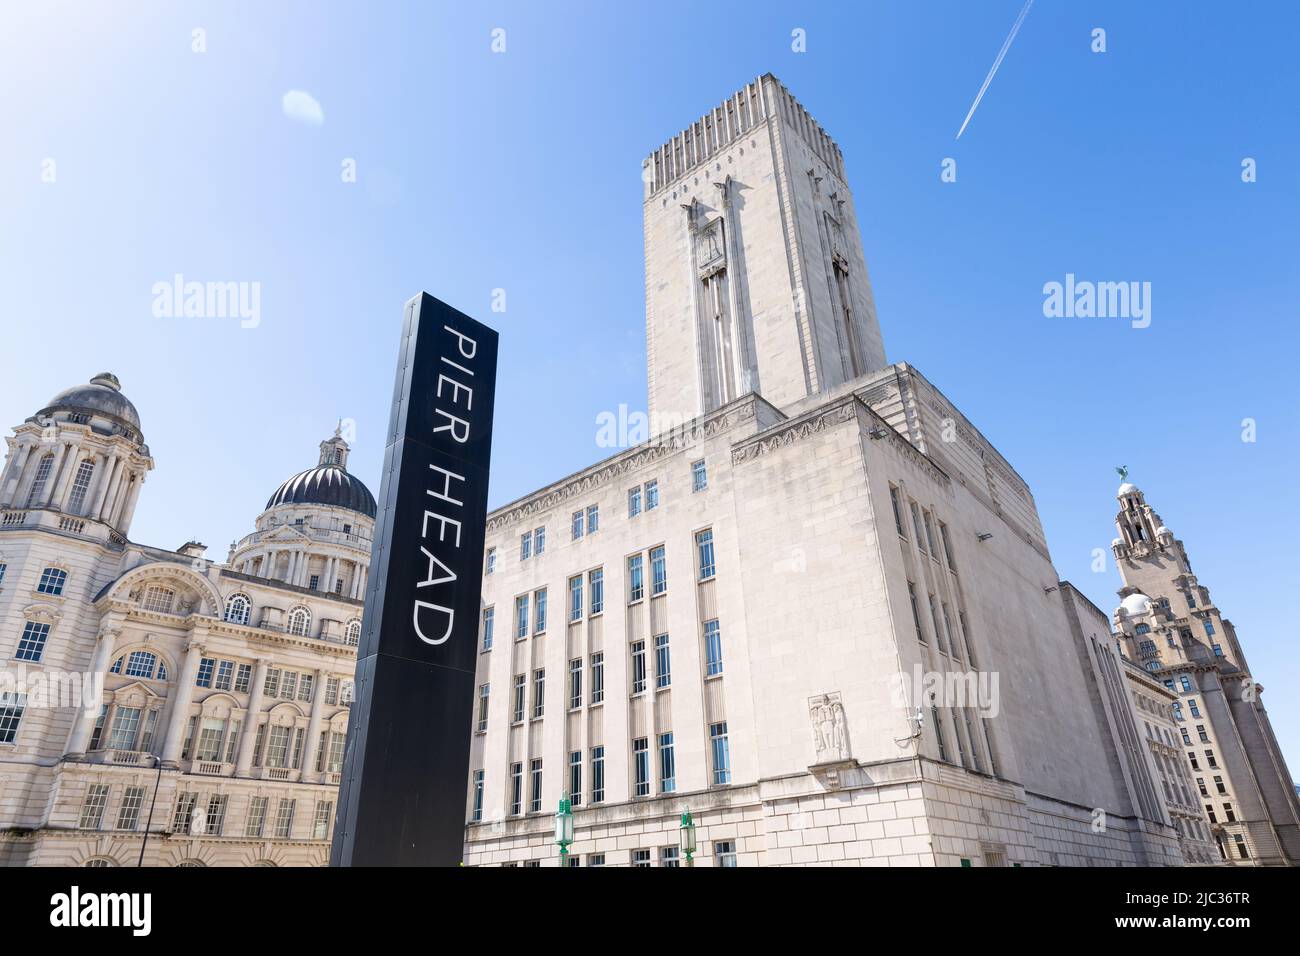 Pier Head sign in front of the art deco style George’s Dock Building, Port of Liverpool Building and Royal Liver Building, Liverpool, England, UK Stock Photo